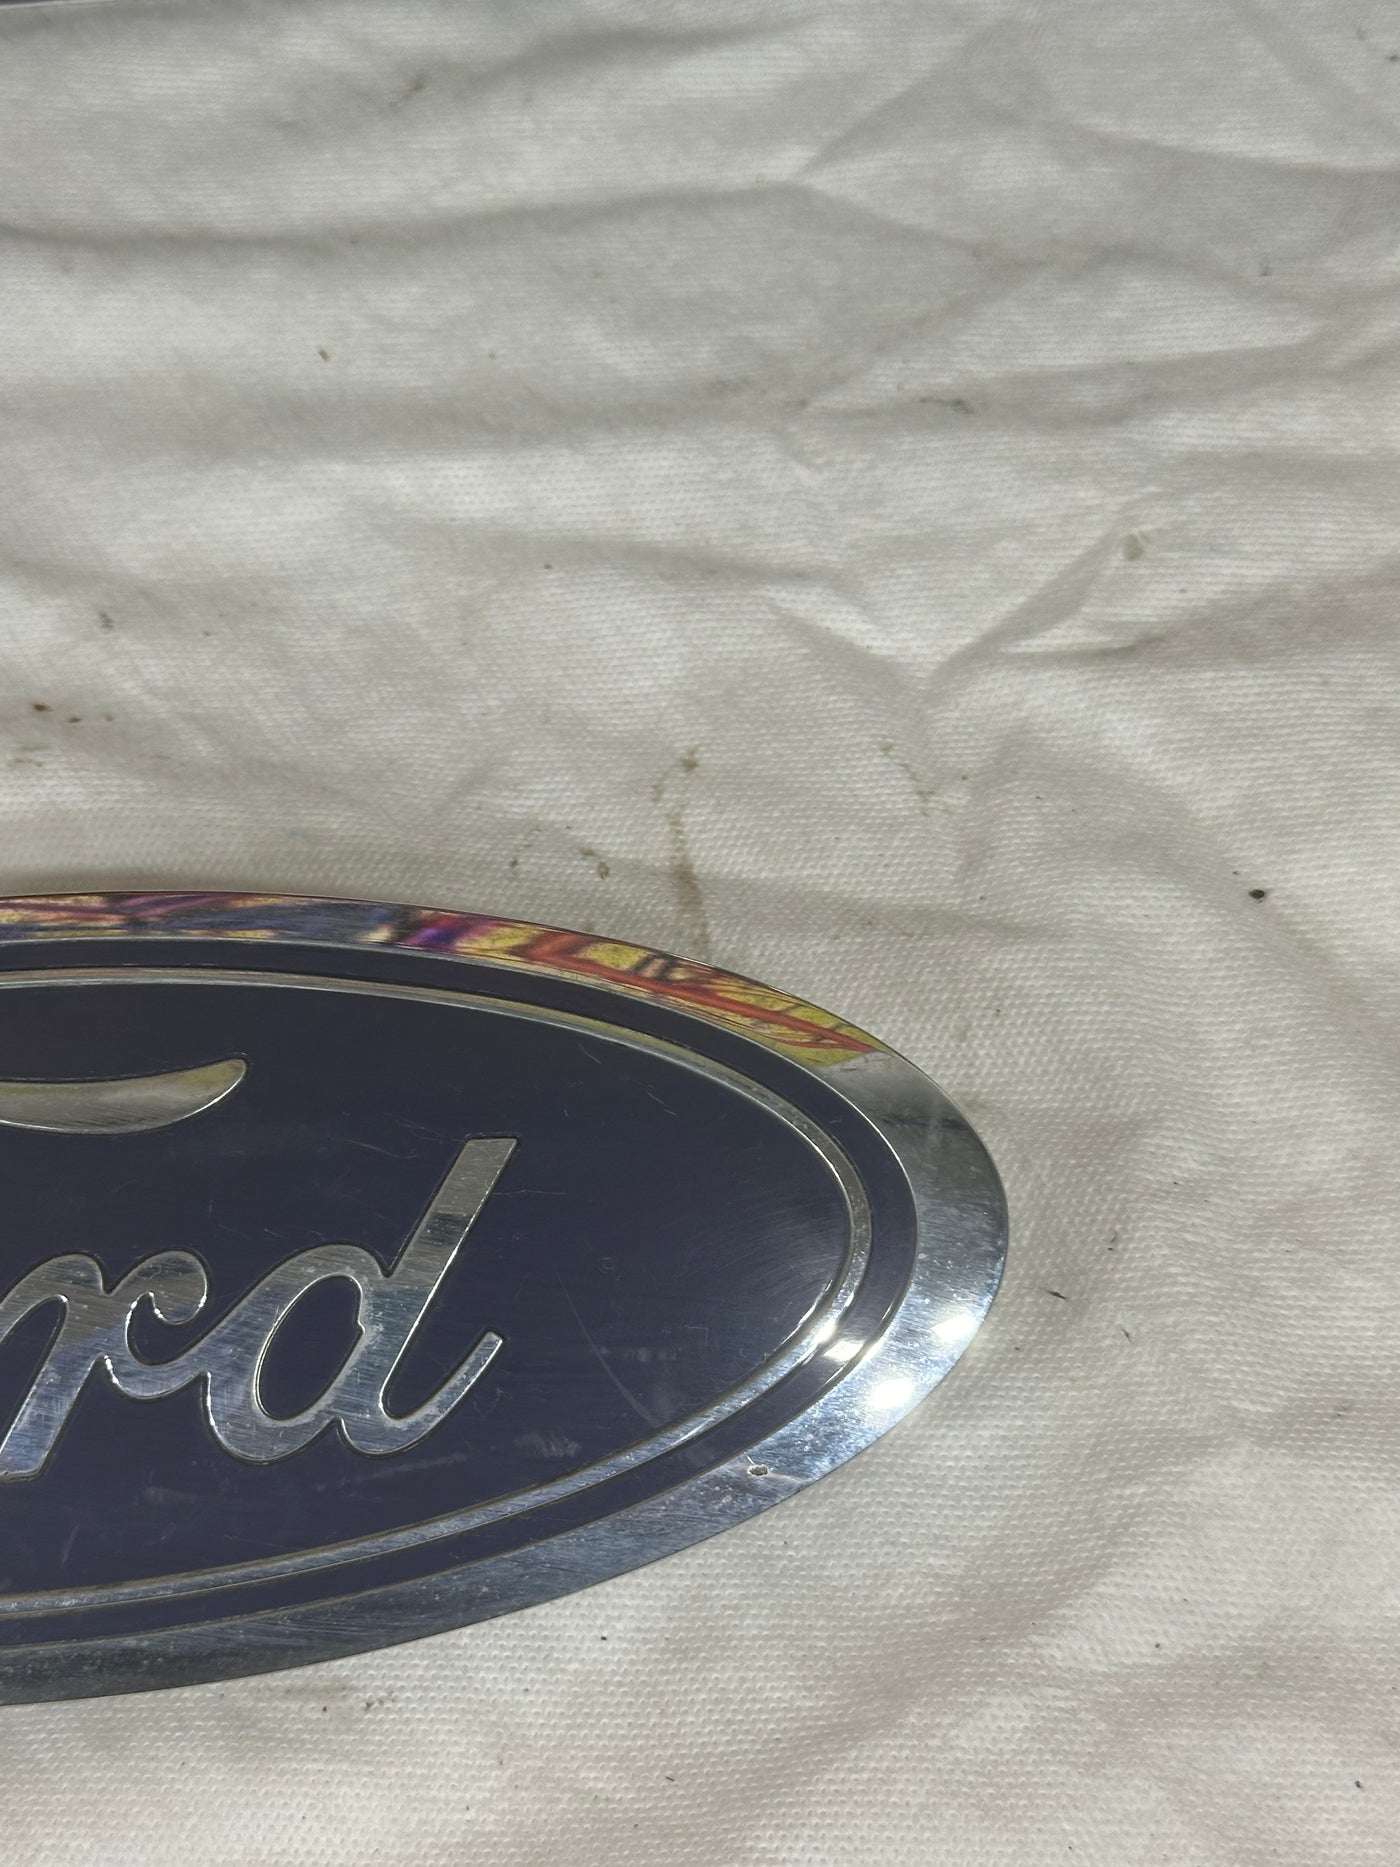 15 16 17 18 19 FORD F150 F-150 REAR TAIL GATE DOOR EMBLEM LOGO BADGE USED A40519